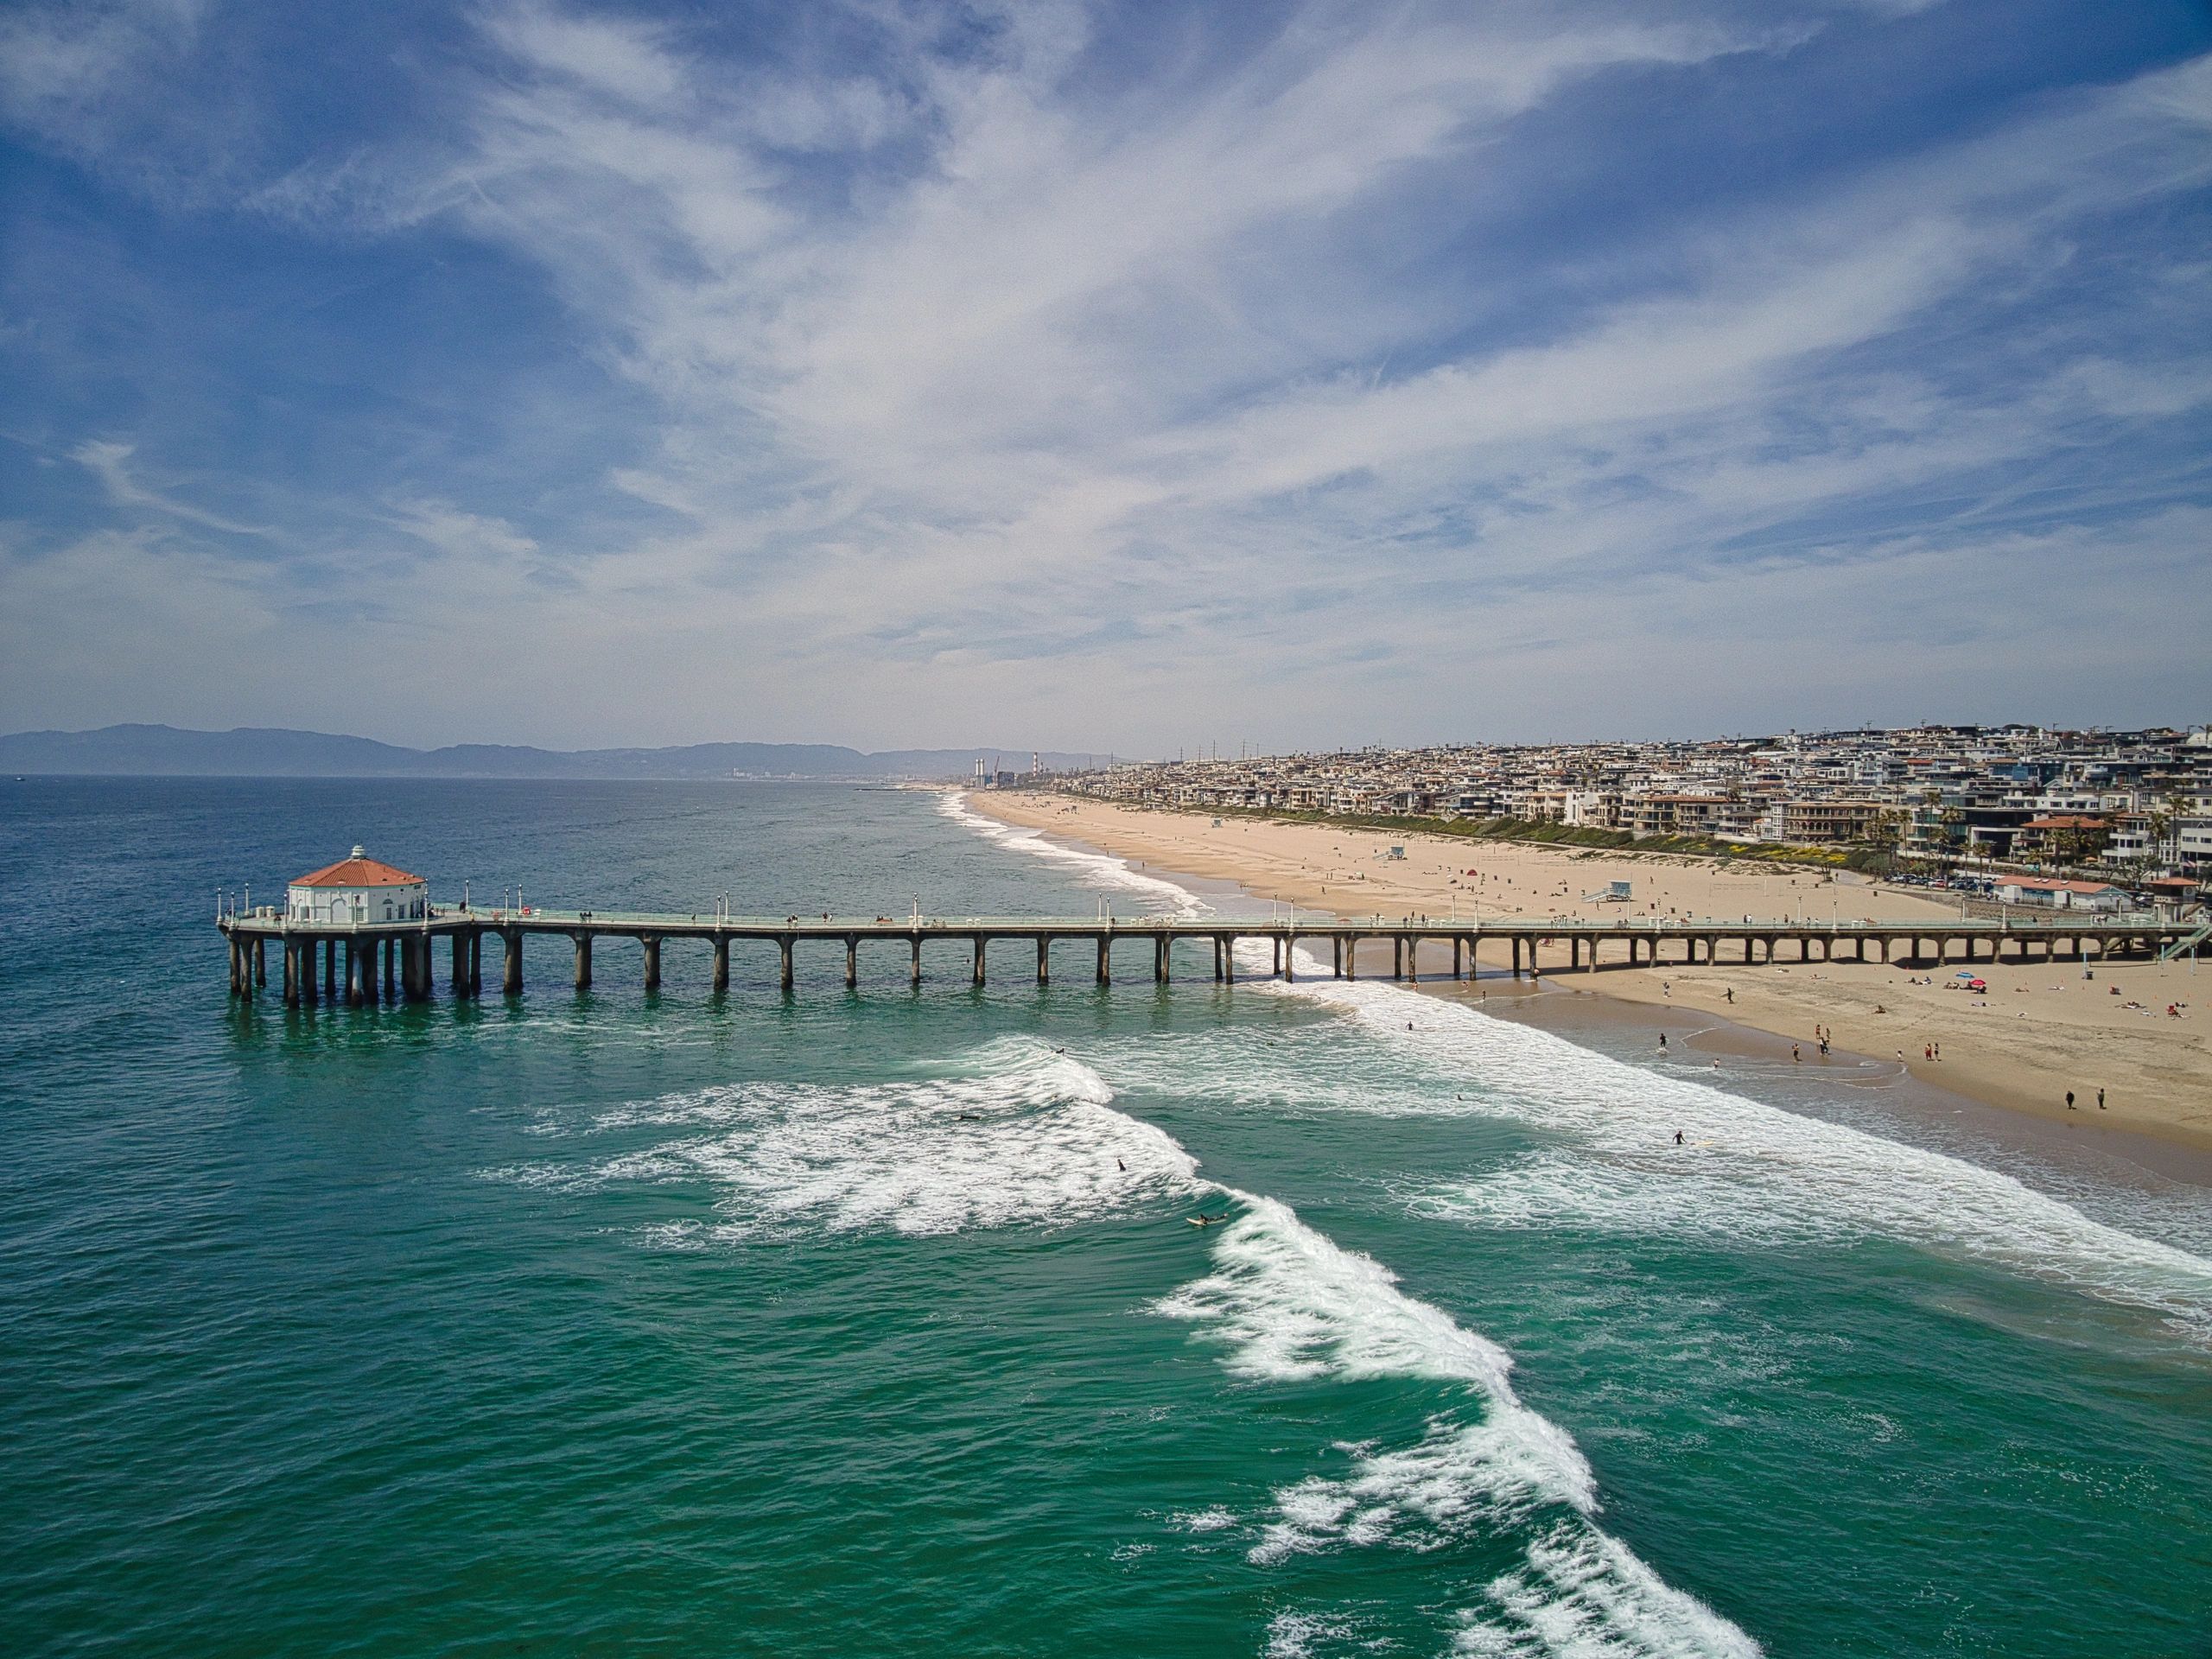 Real Estate Photography
Soldbyphoto.com
Los Angeles & Orange County
Drone Photography
